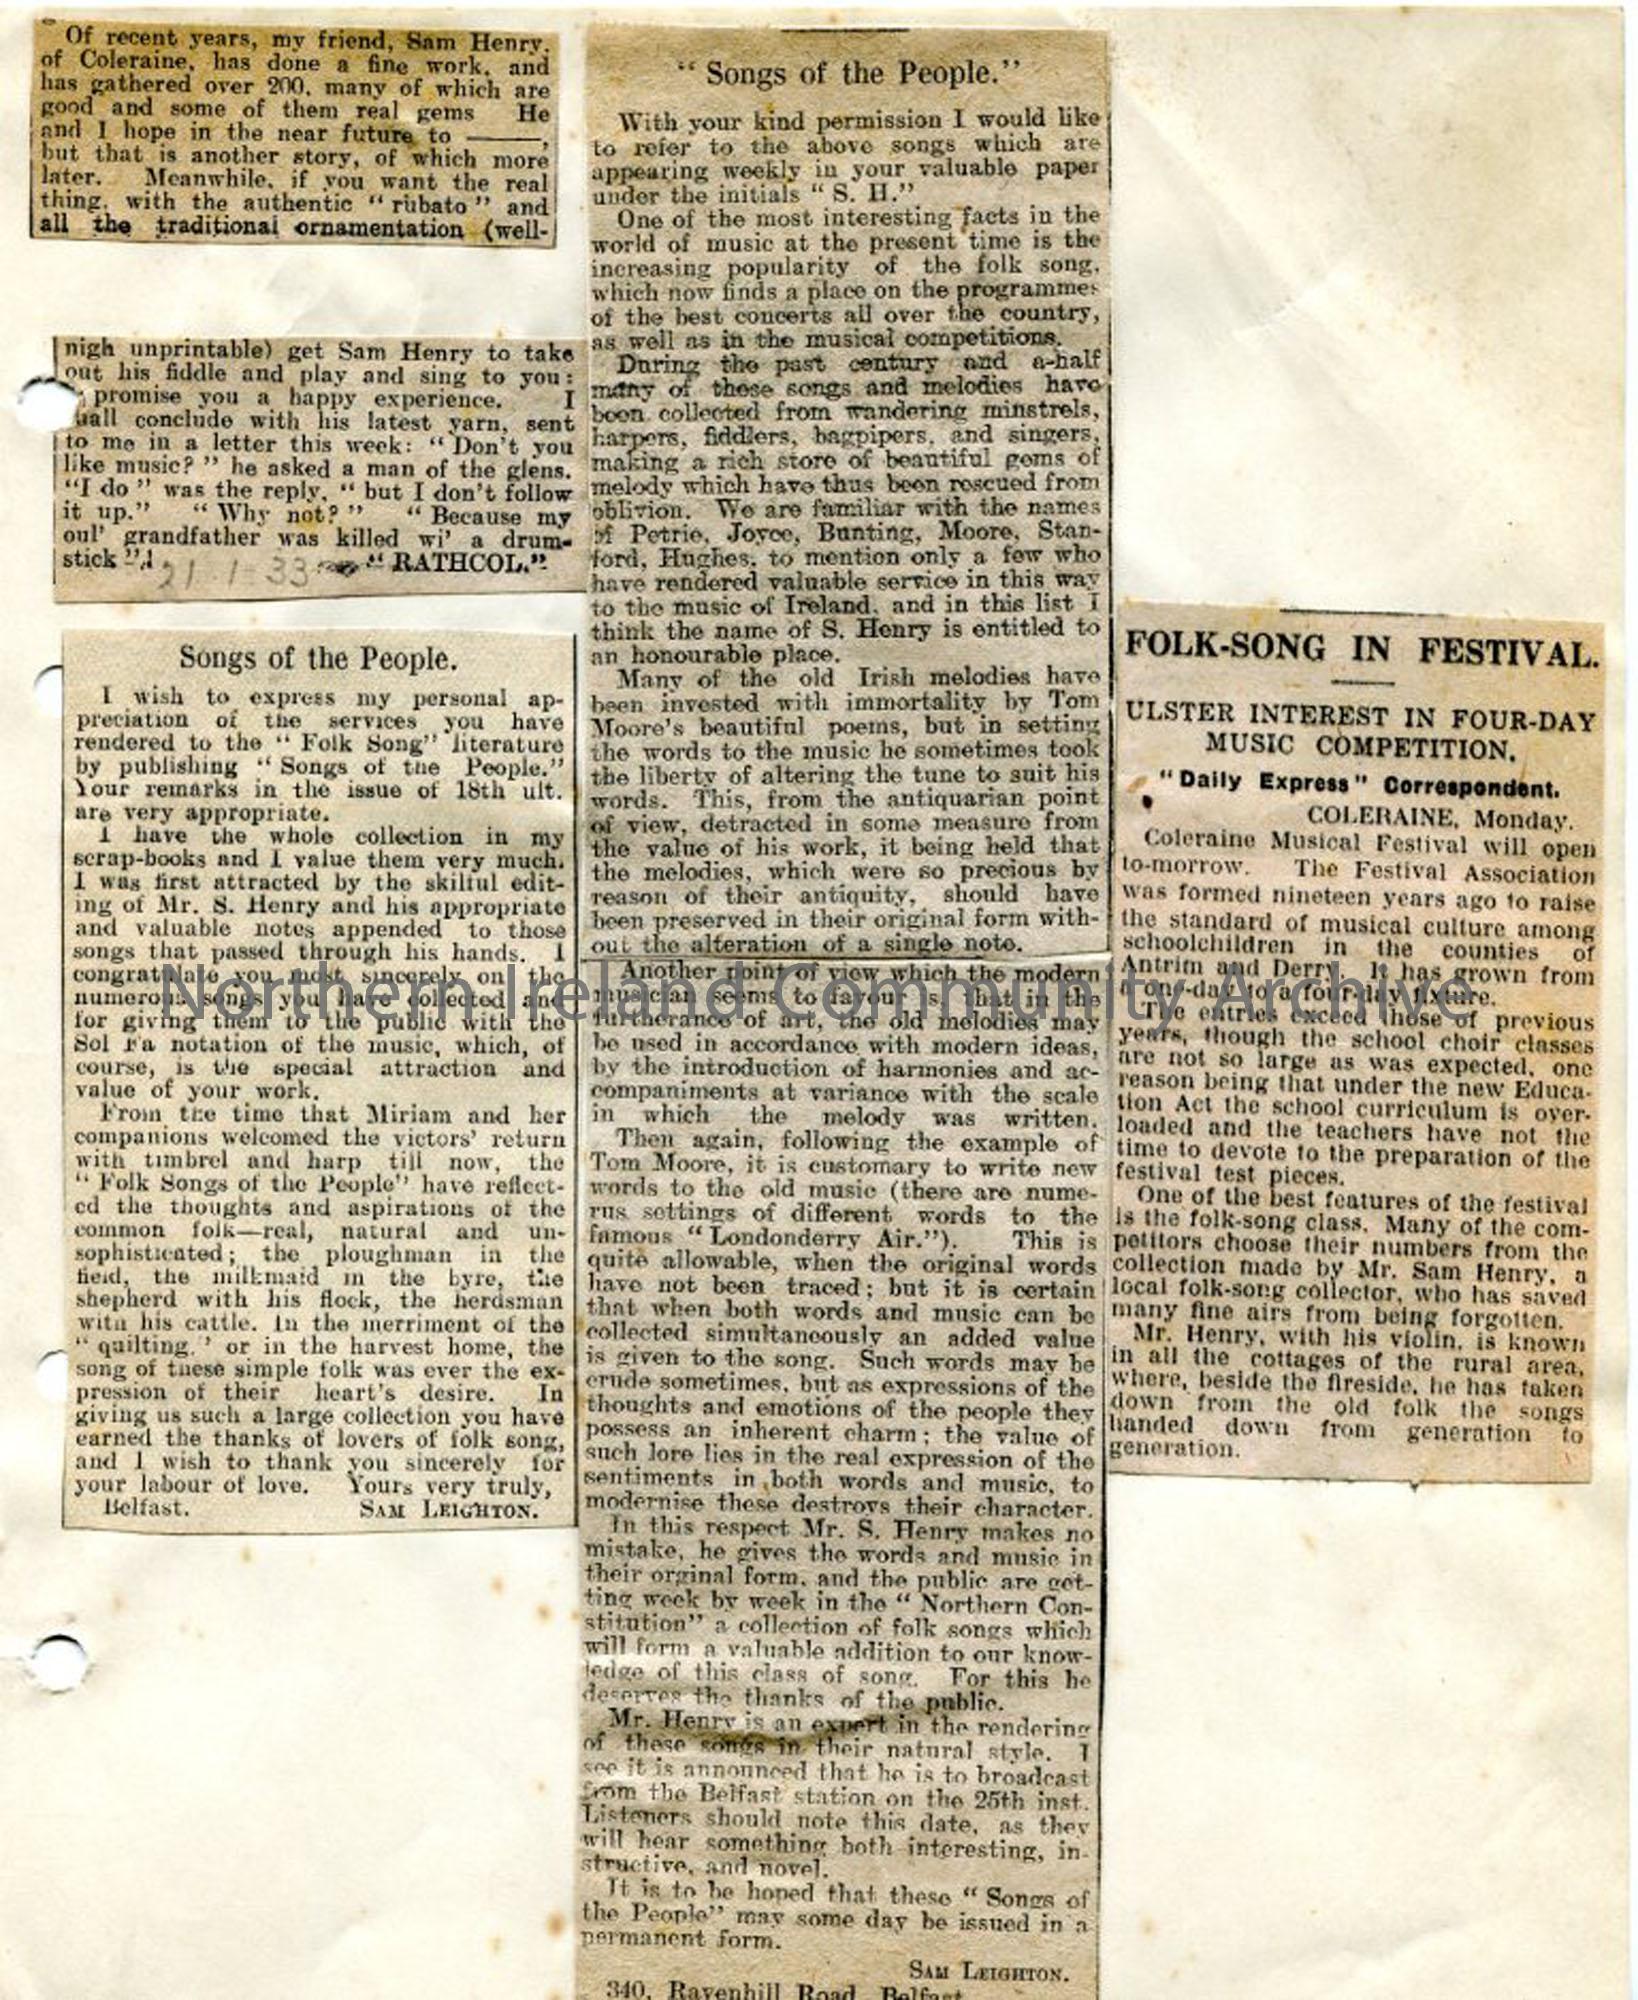 Newspaper articles about ‘Songs of the People’